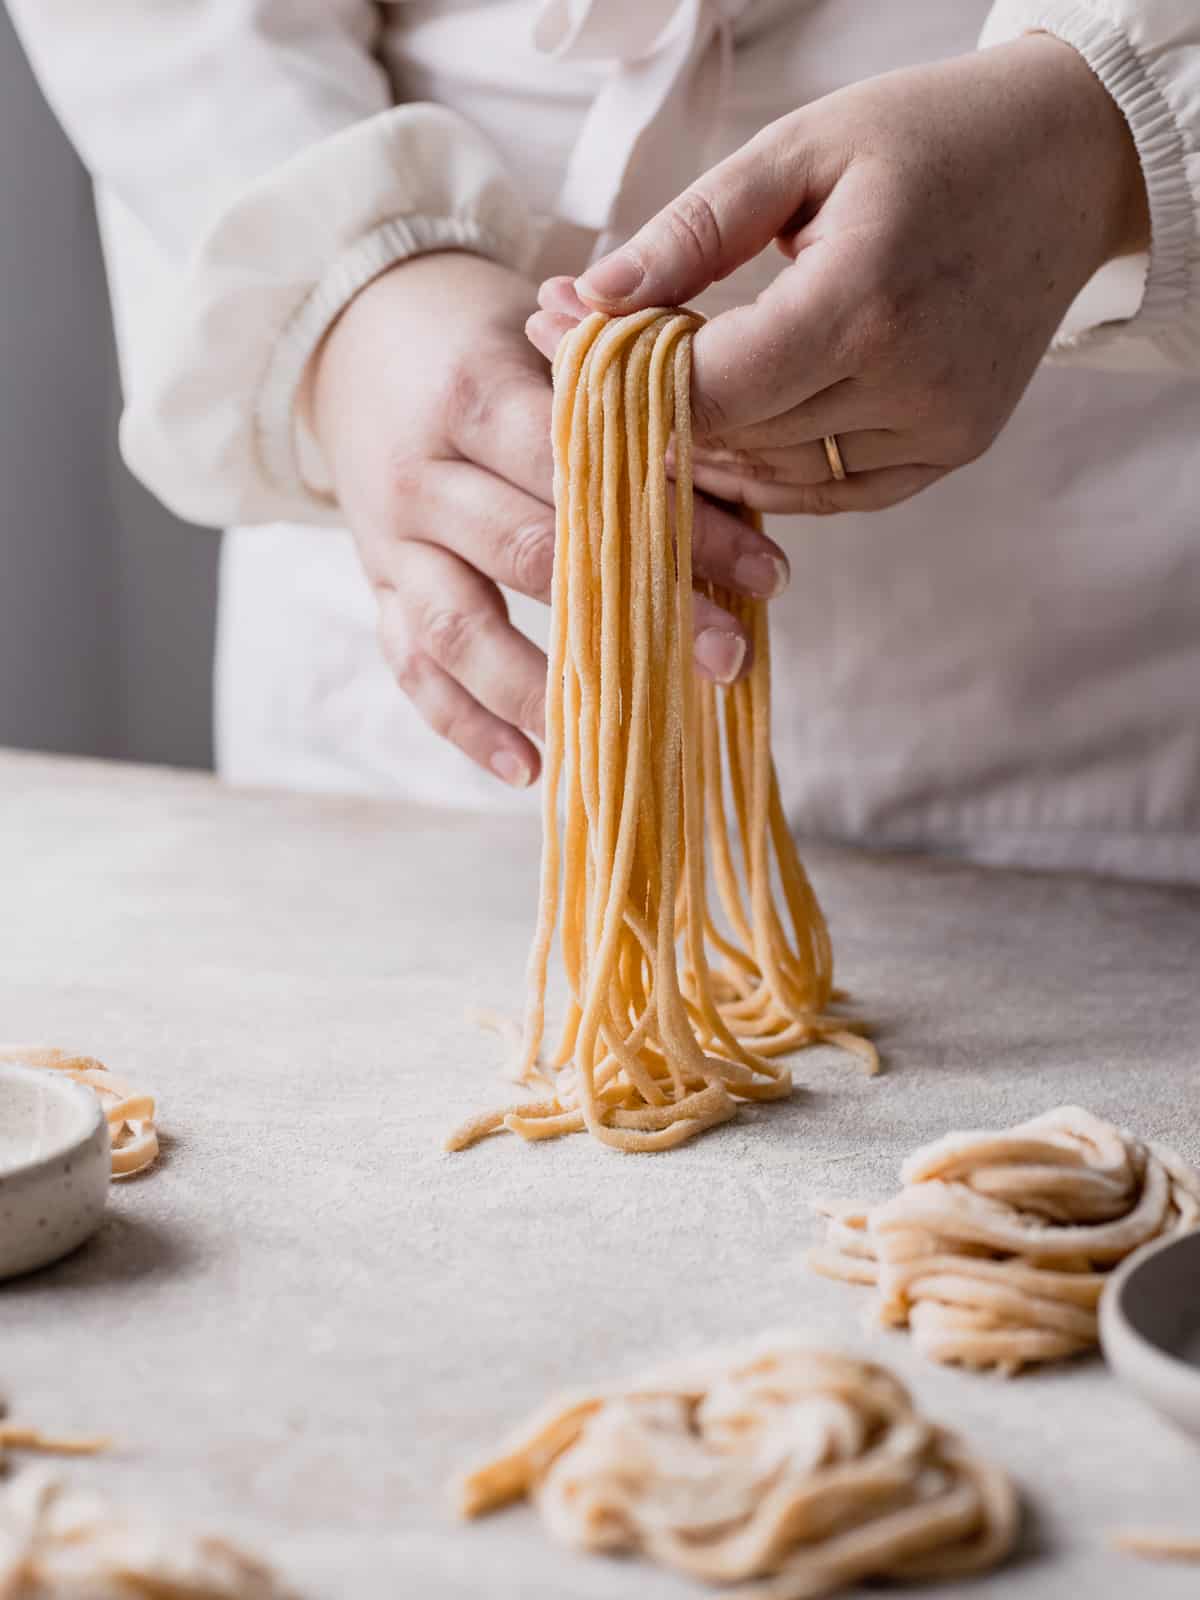 Hands holding the Tonnarelli with around some pasta nests